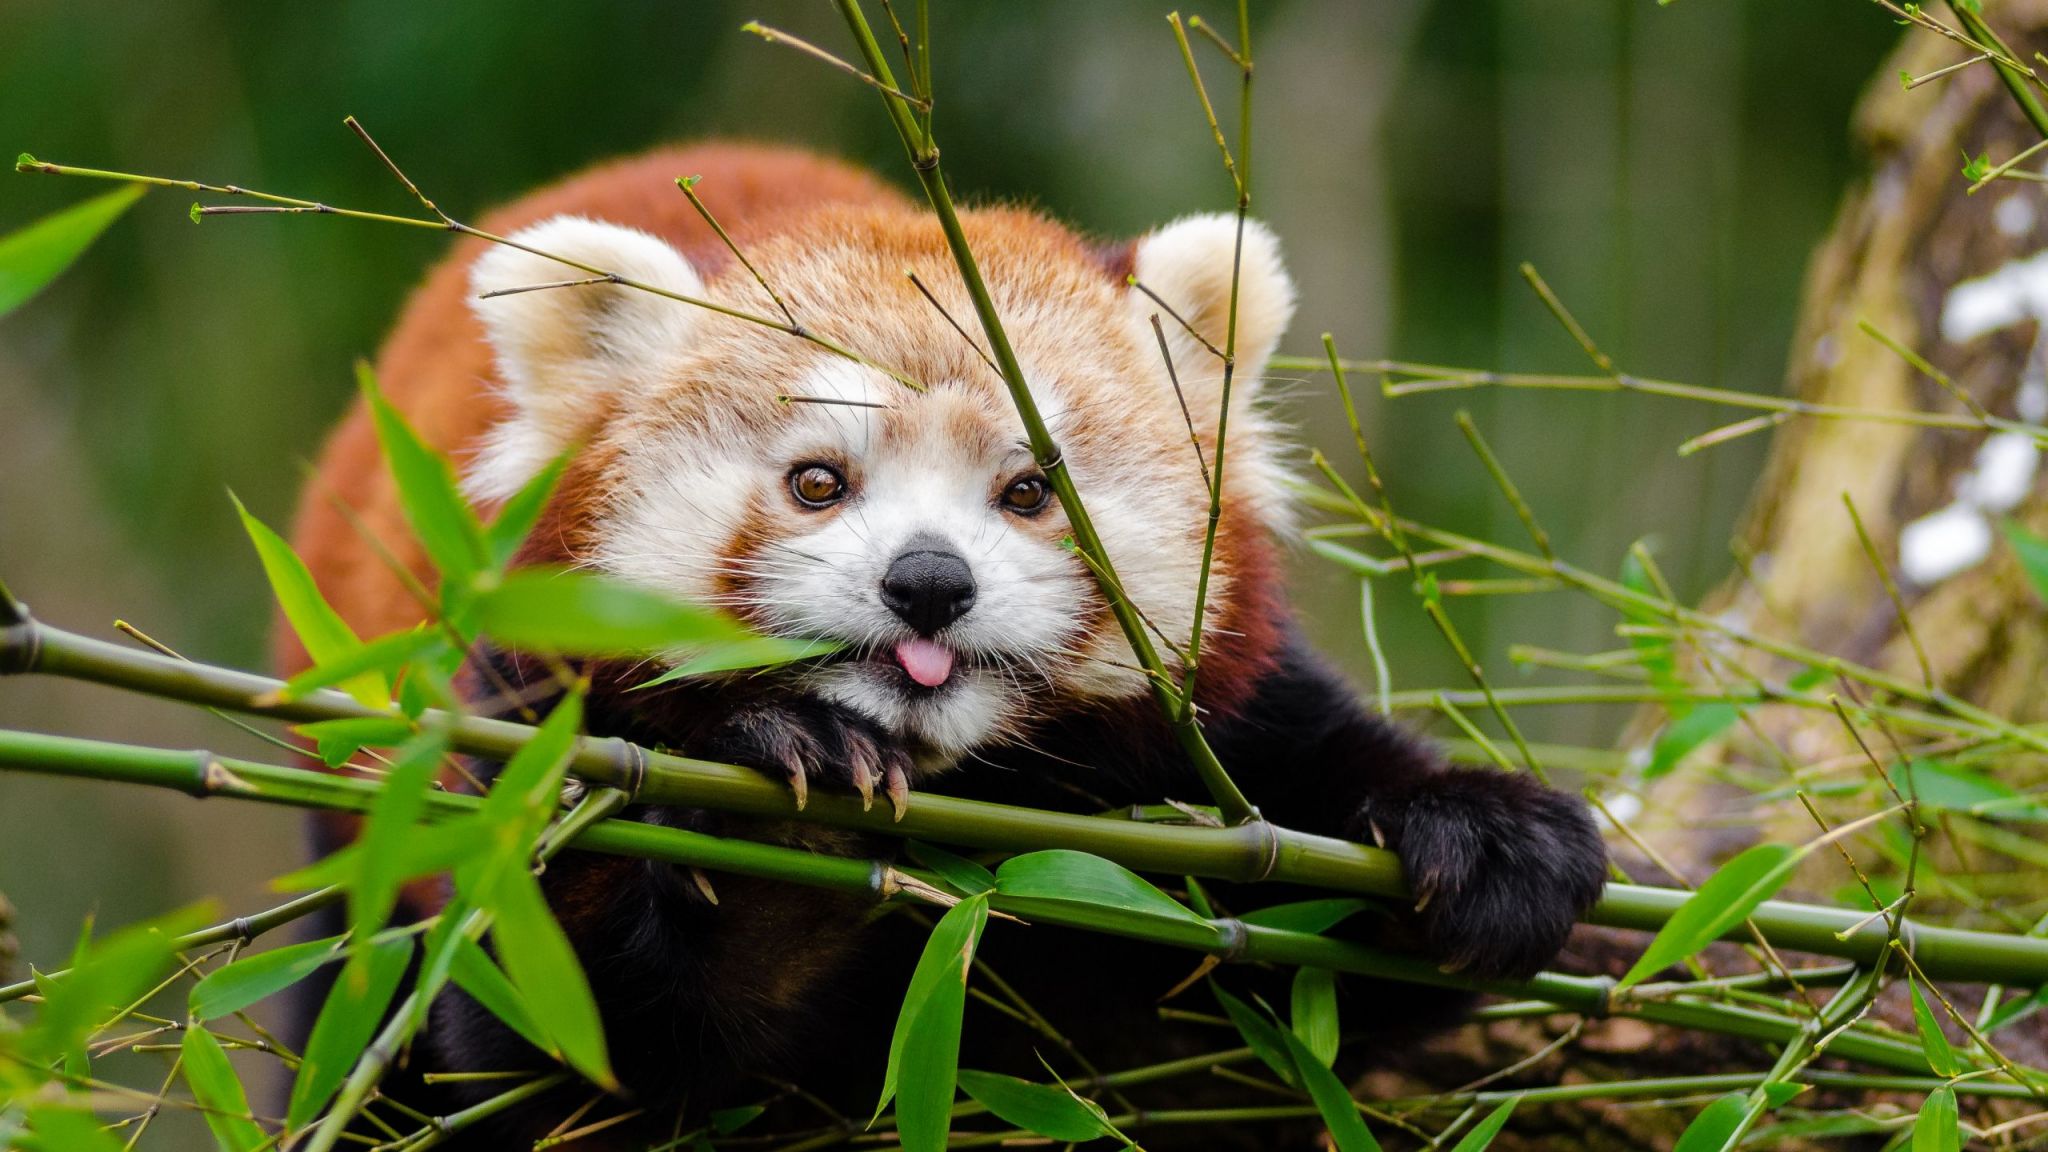 Bamboo is often eaten by red pandas in Asian forests. 